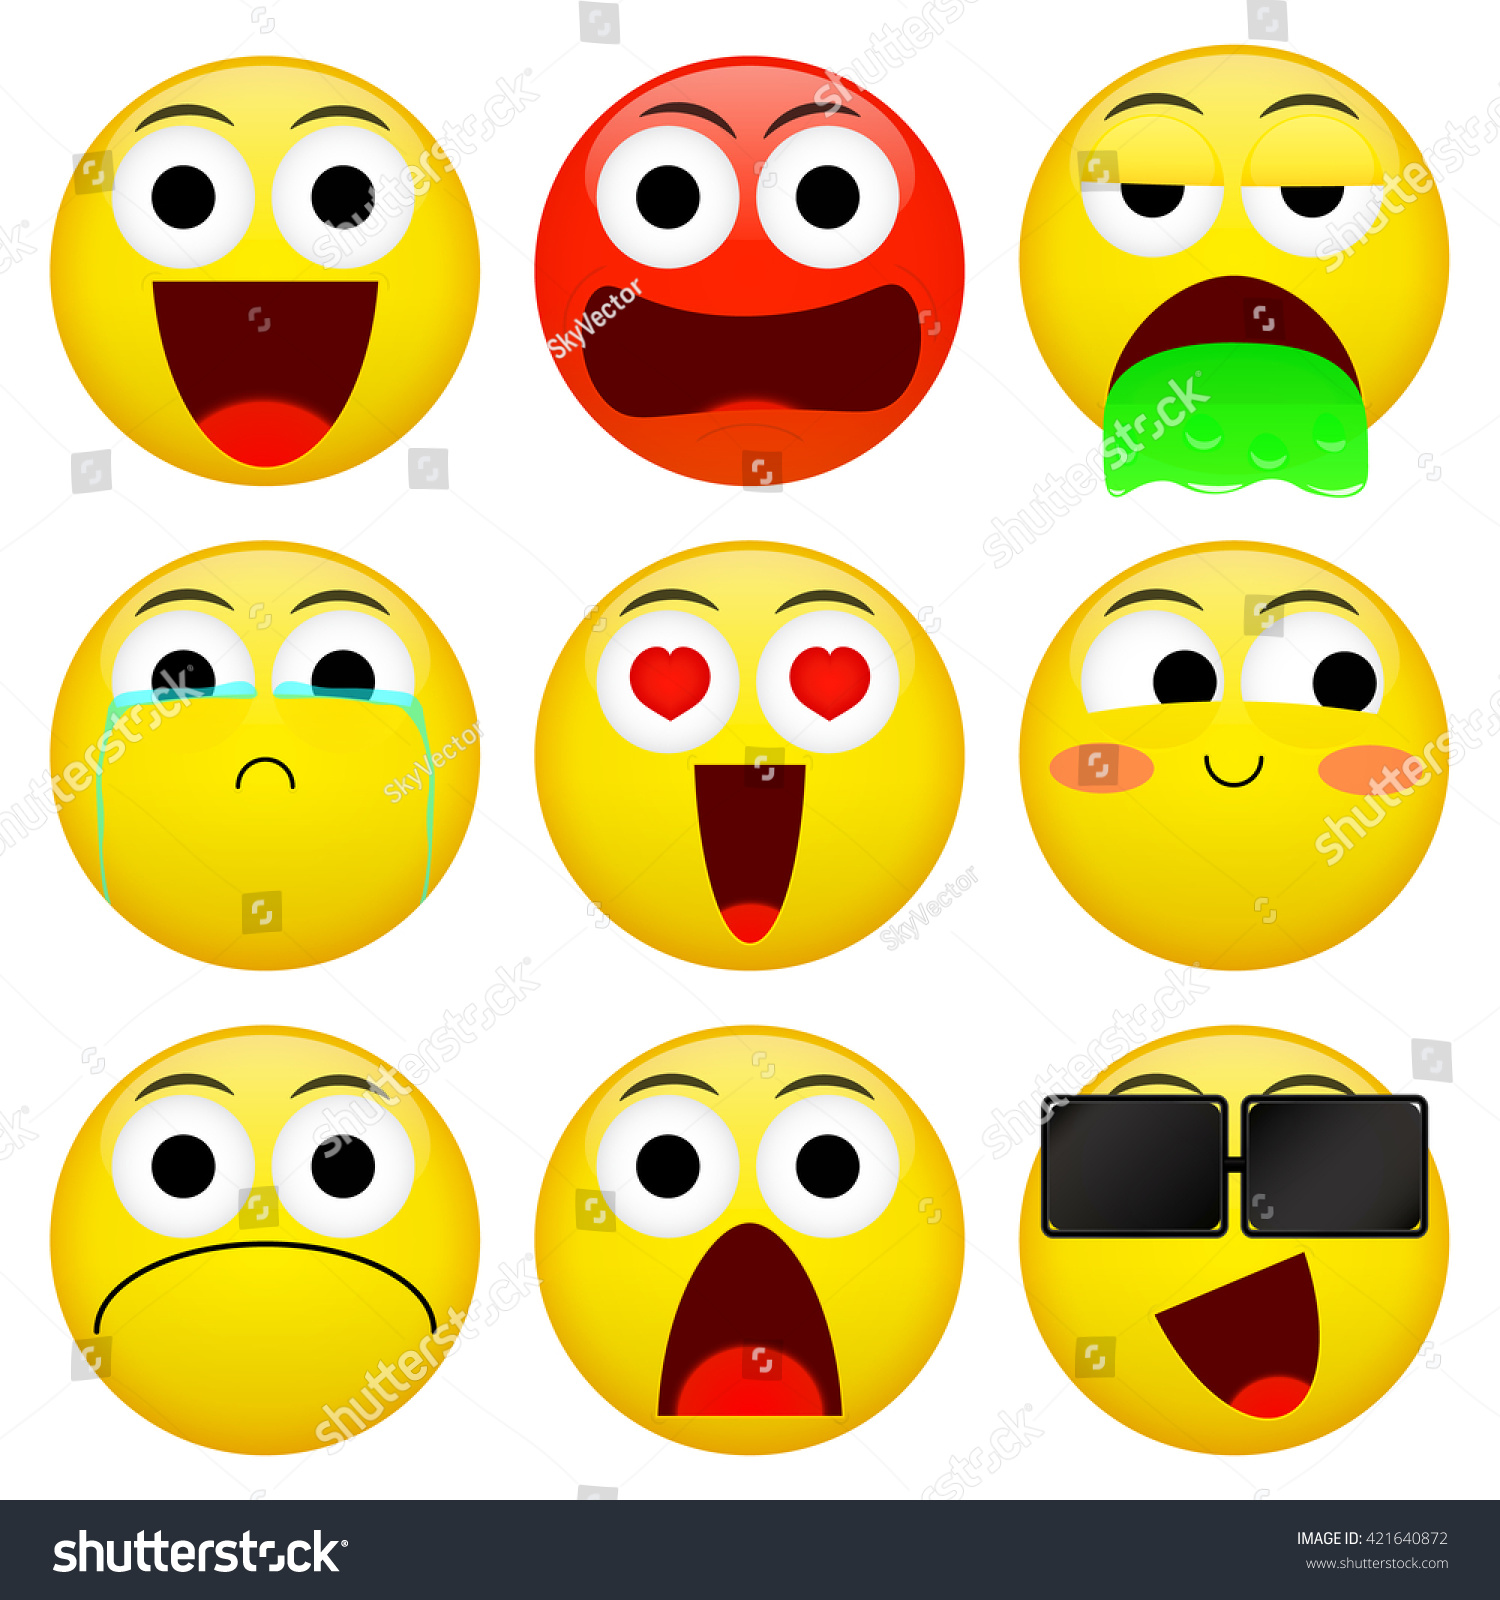 Emoji Smile Emoticon Pack Smile Angry Stock Vector Royalty Free